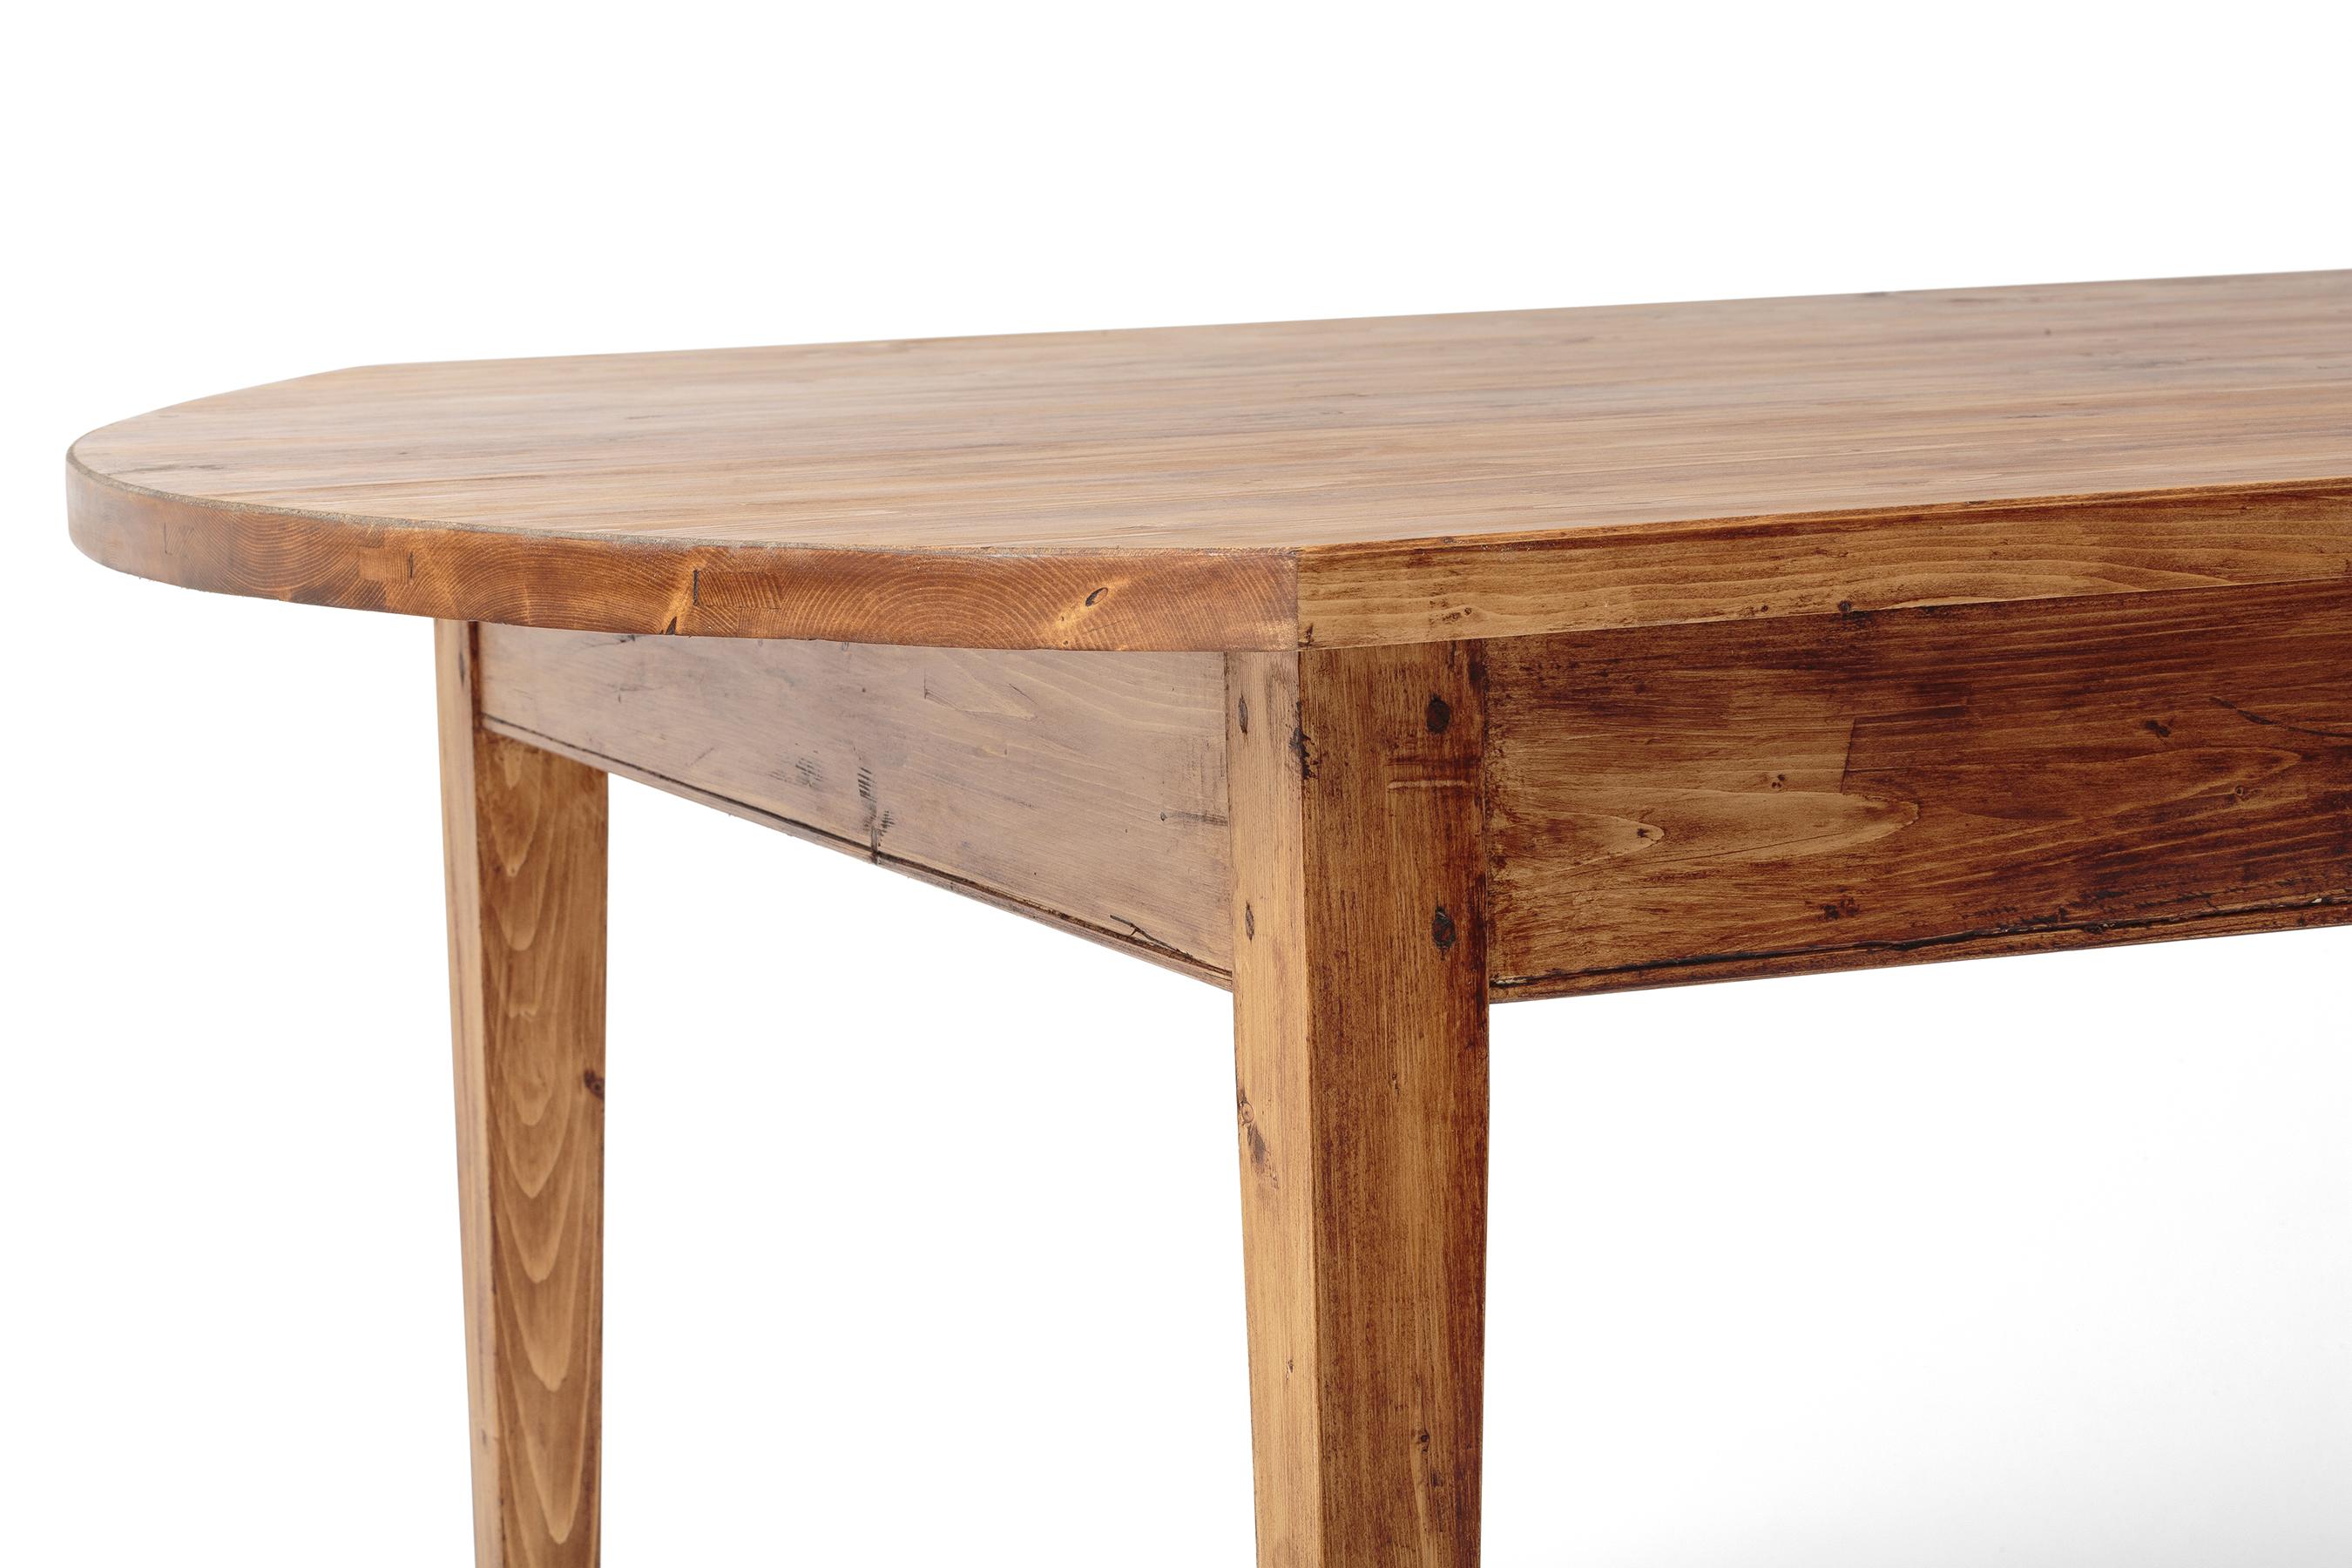 Shaker Adair Table, Refined English Rustic Dining Table in Spruce